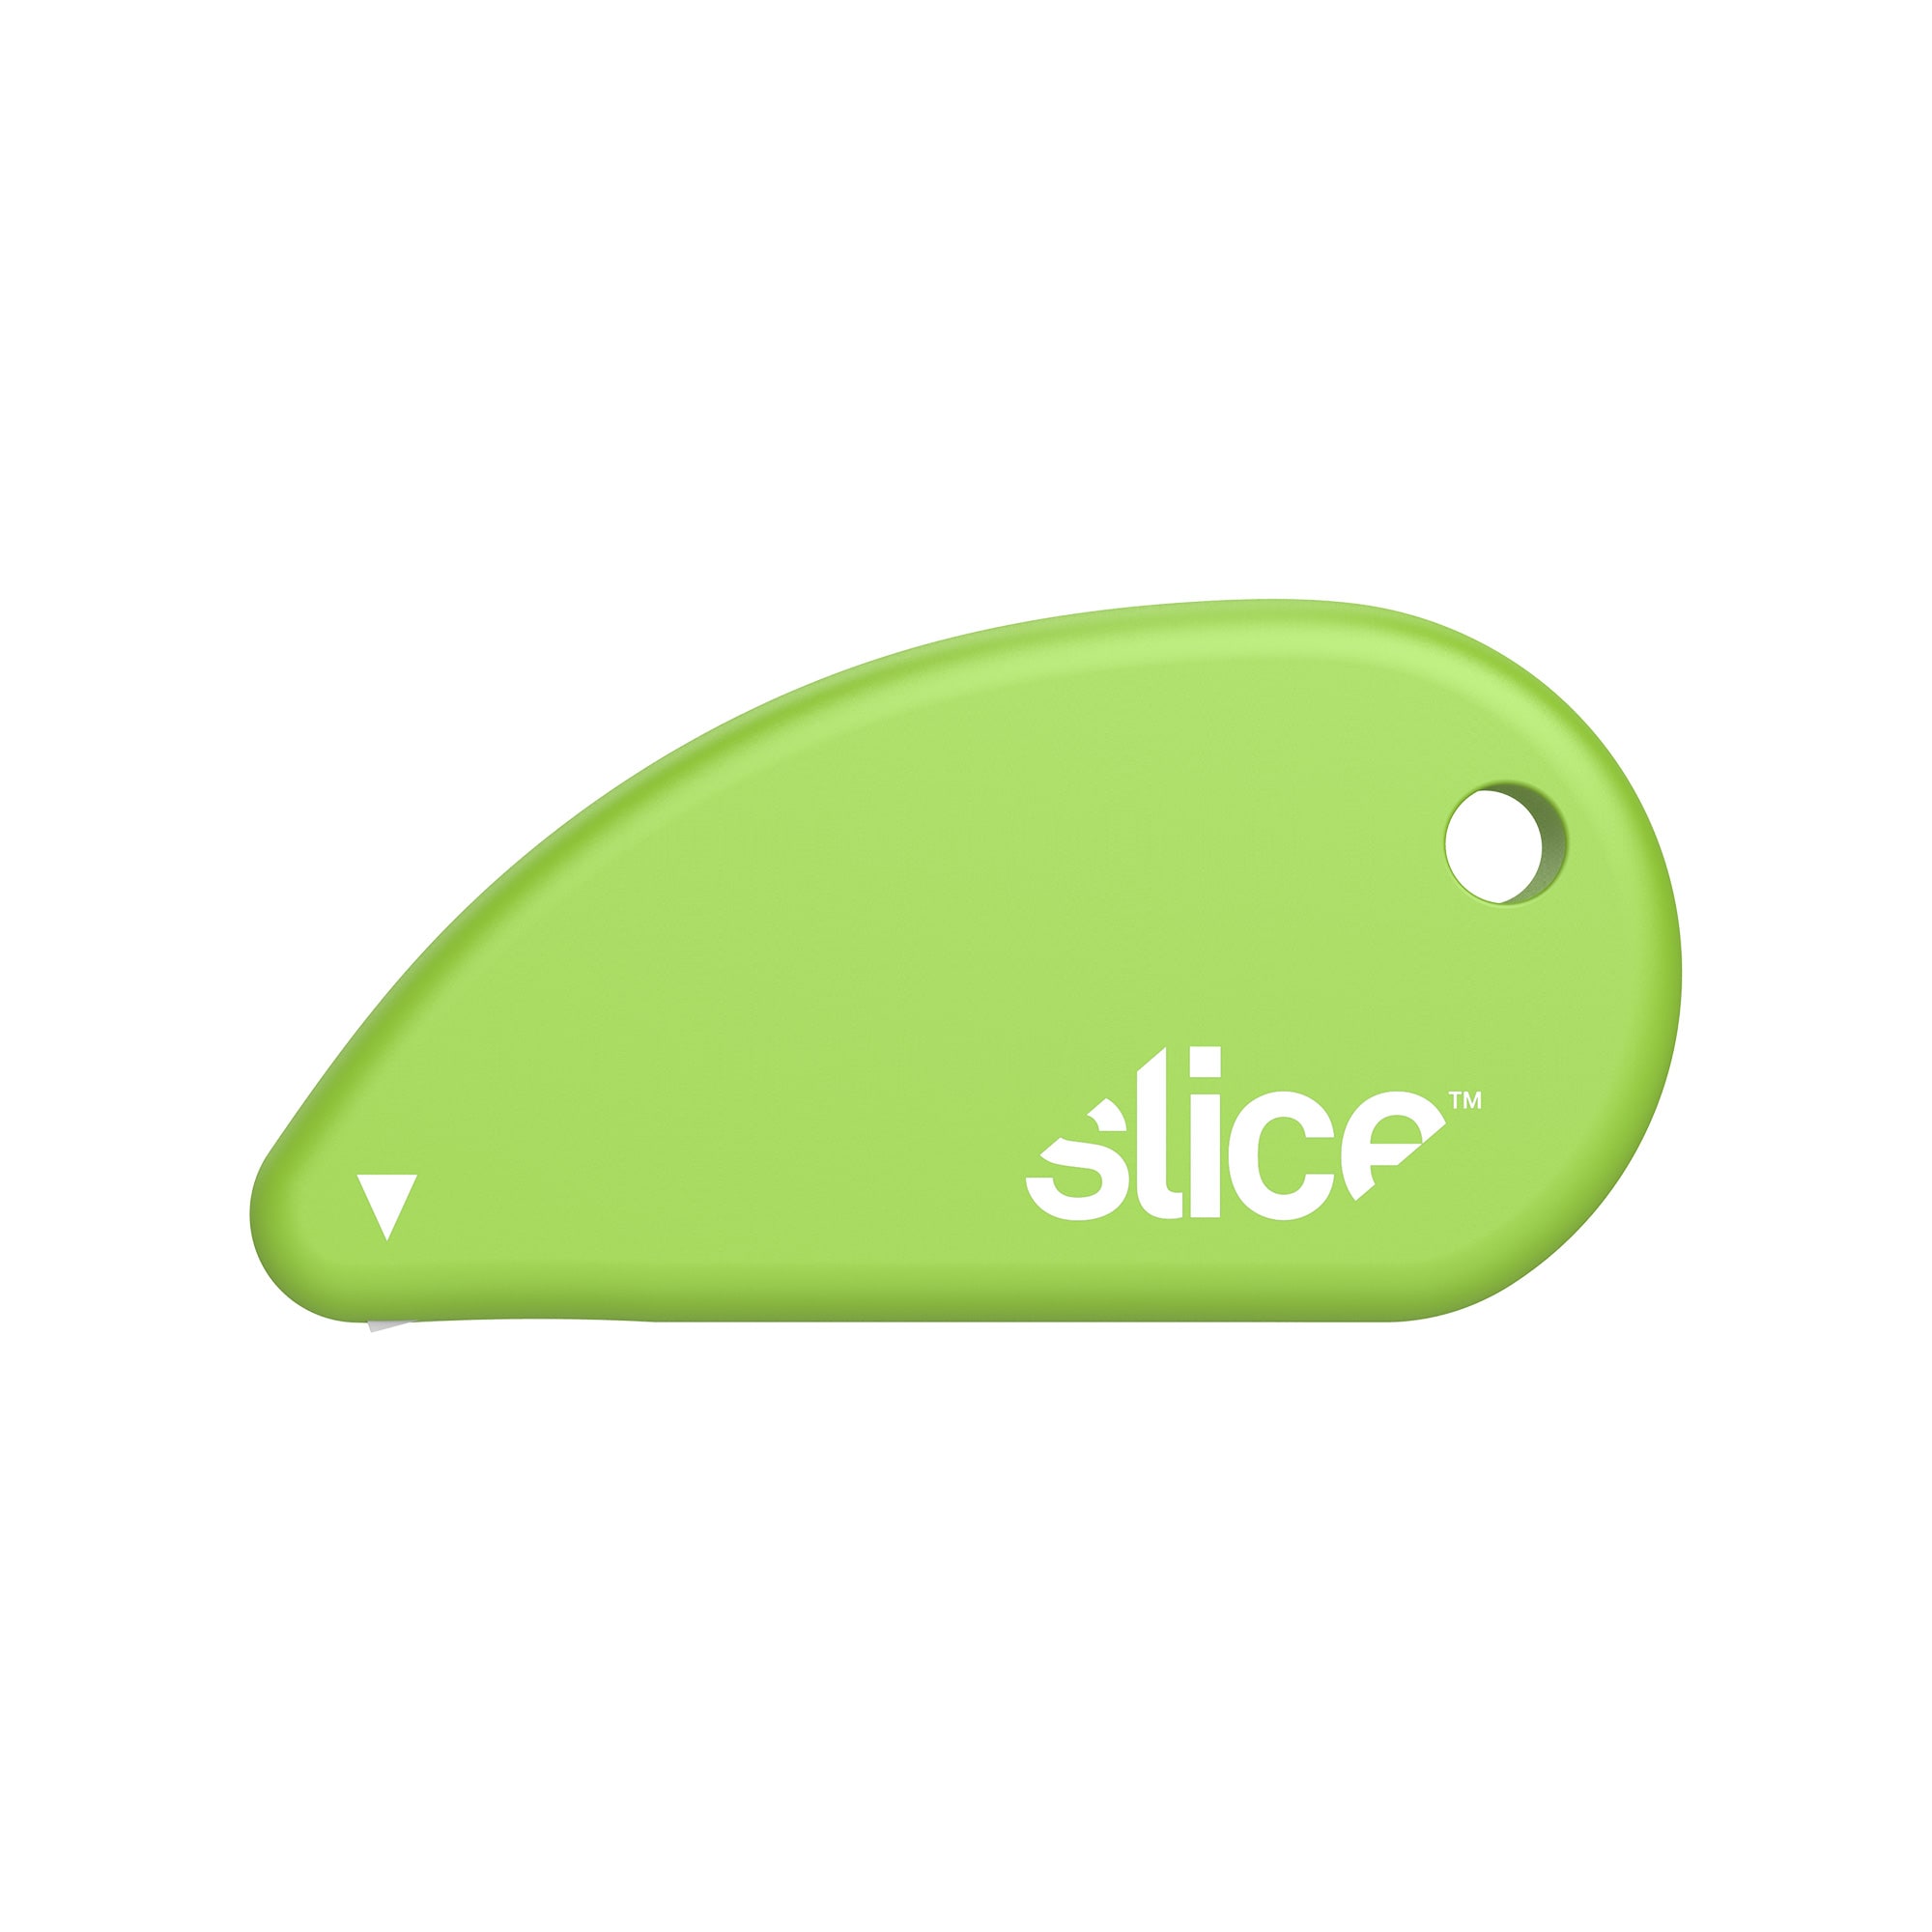 Slice Safety Cutter Review - Designed to Perform! 